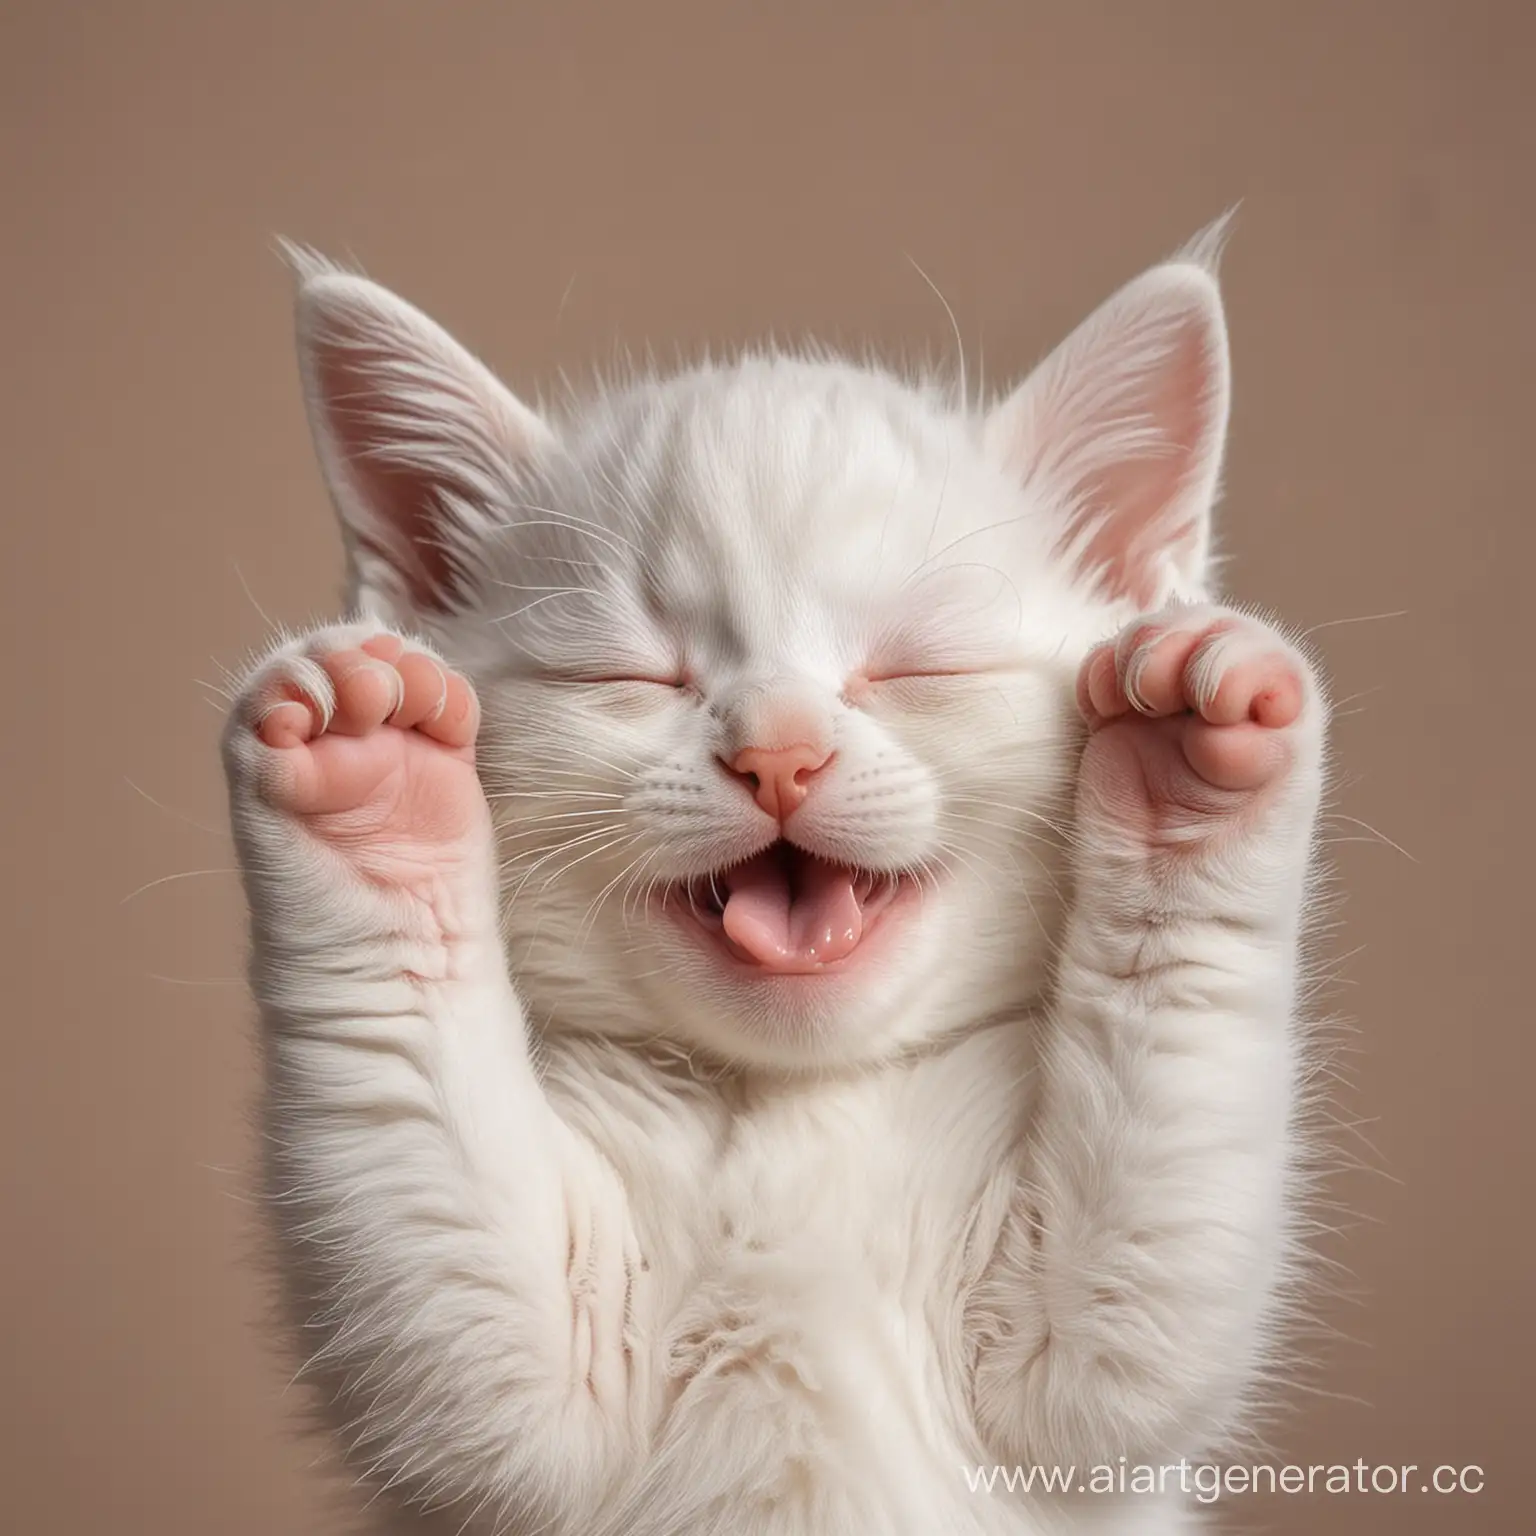 Kitten-Covering-Ears-with-Paws-Adorable-Feline-Expression